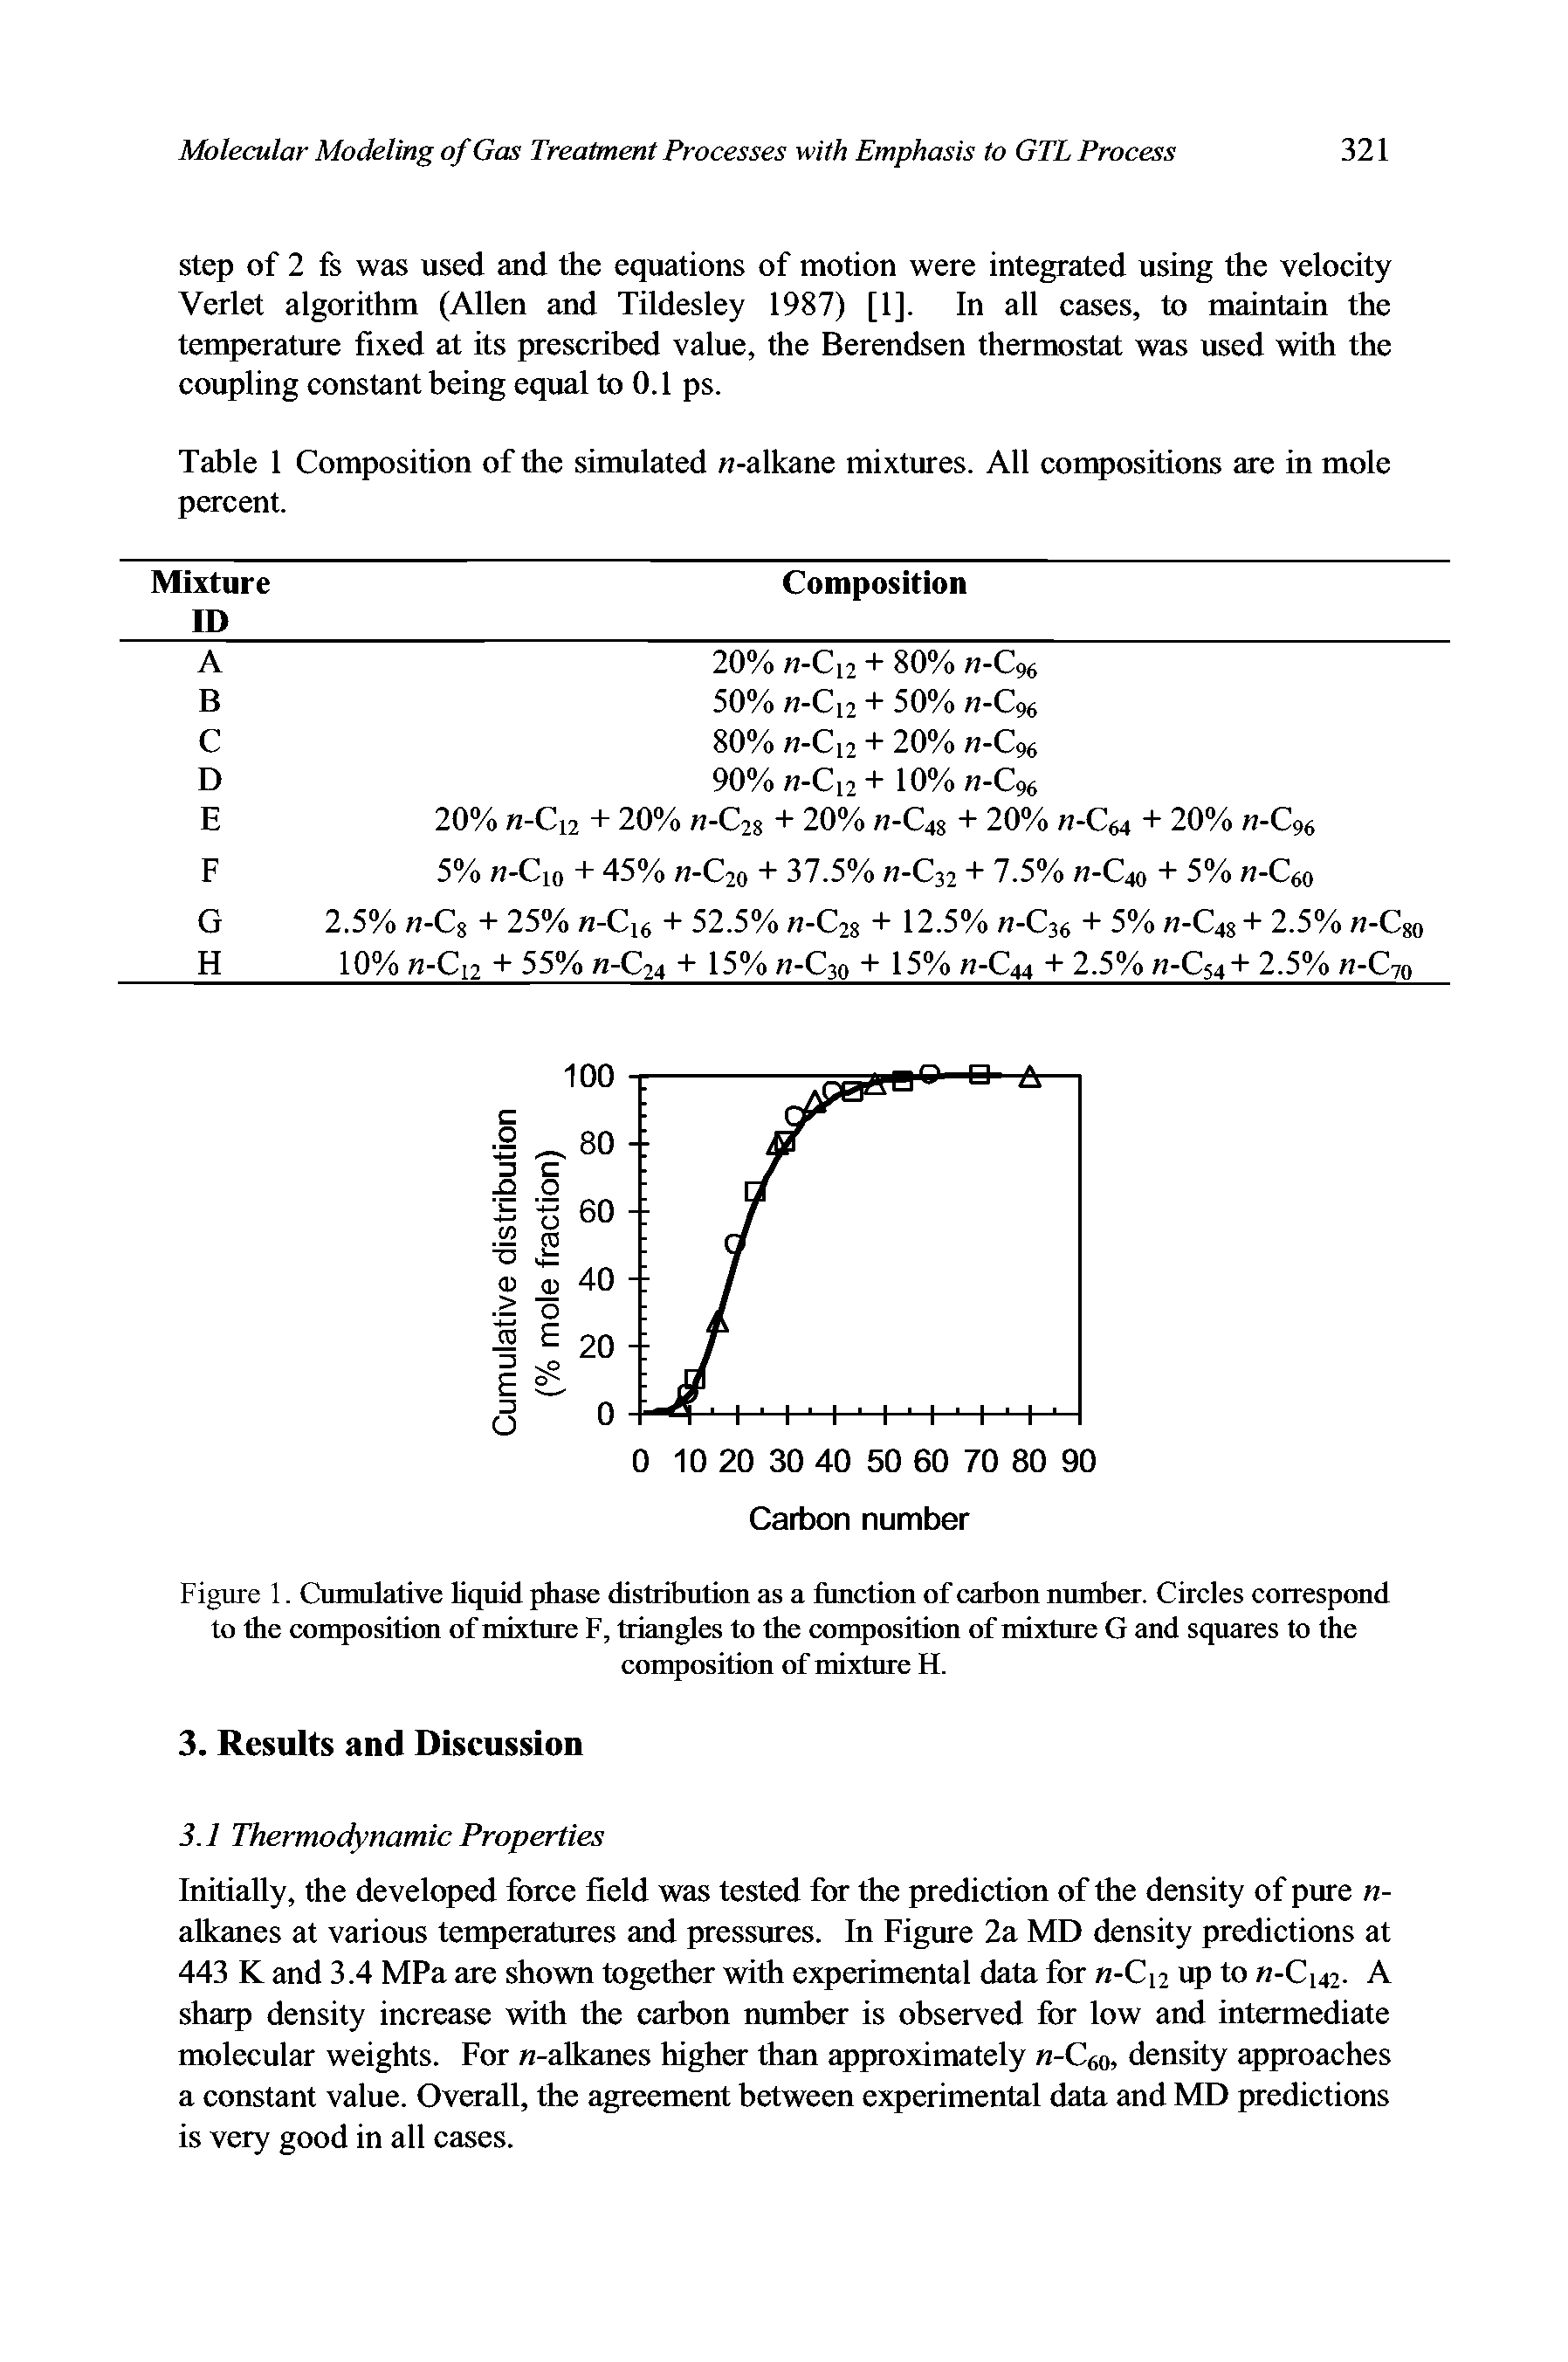 Figure 1. Cumulative liquid phase distribution as a function of carbon number. Circles correspond to the composition of mixture F, triangles to the eomposition of mixture G and squares to the...